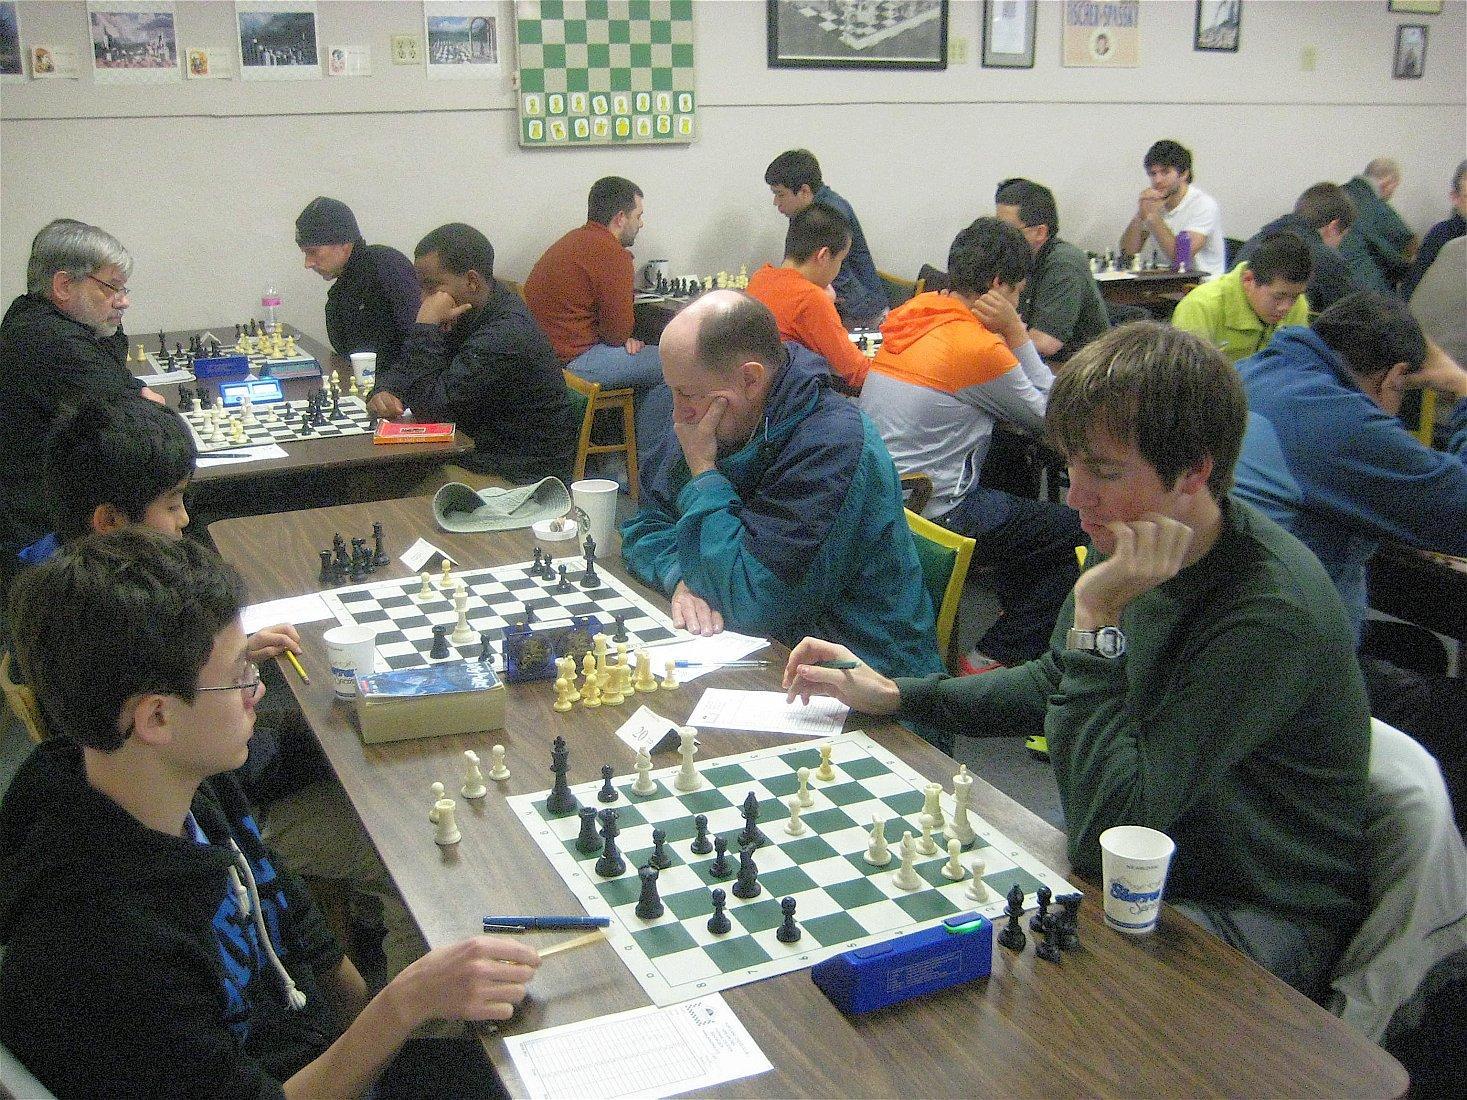 The Portland Chess Club during the 2014 Portland Spring Open. Photo Credit: Brian Berger